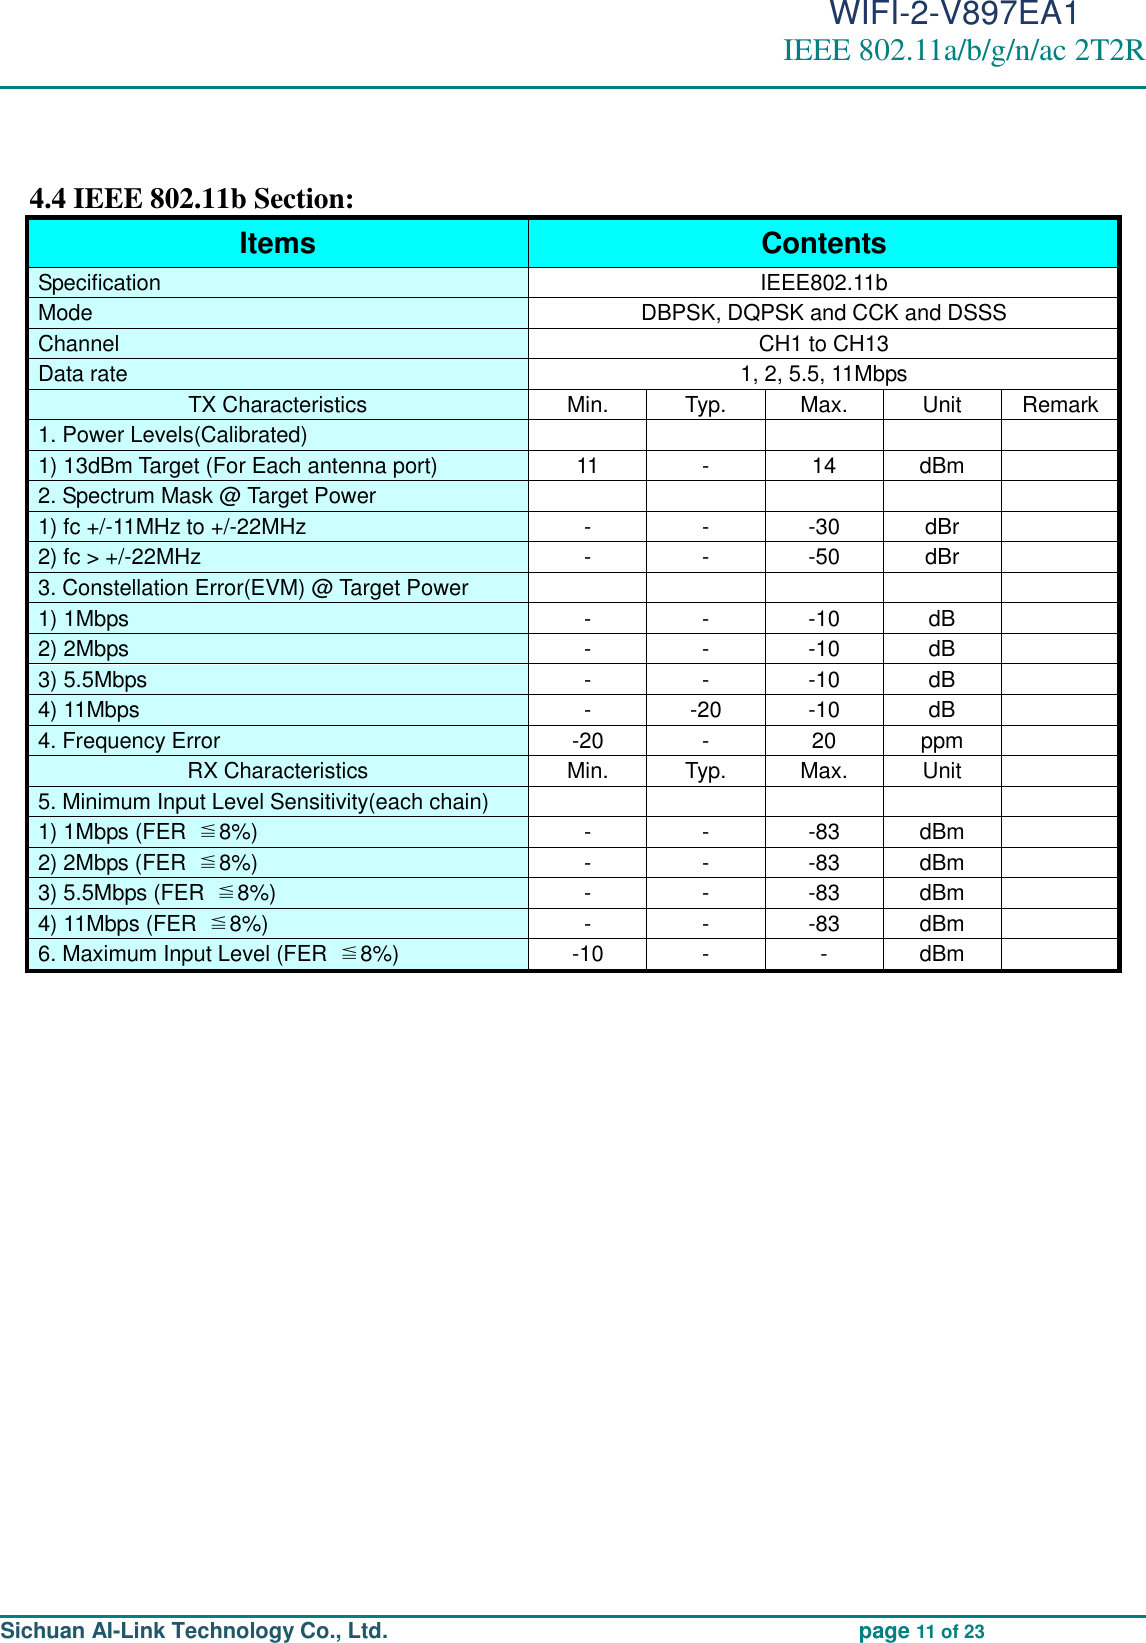                                                                                          WIFI-2-V897EA1 IEEE 802.11a/b/g/n/ac 2T2R                                                                                                                                                                                                                                                                                                                                                                                                                     Sichuan AI-Link Technology Co., Ltd.                                             page 11 of 23   4.4 IEEE 802.11b Section: Items Contents Specification   IEEE802.11b   Mode   DBPSK, DQPSK and CCK and DSSS Channel   CH1 to CH13   Data rate   1, 2, 5.5, 11Mbps   TX Characteristics Min. Typ. Max. Unit Remark 1. Power Levels(Calibrated)        1) 13dBm Target (For Each antenna port)   11 - 14 dBm  2. Spectrum Mask @ Target Power        1) fc +/-11MHz to +/-22MHz   - - -30 dBr  2) fc &gt; +/-22MHz   - - -50 dBr  3. Constellation Error(EVM) @ Target Power        1) 1Mbps   - - -10 dB  2) 2Mbps   - - -10 dB  3) 5.5Mbps   - - -10 dB  4) 11Mbps   - -20 -10 dB  4. Frequency Error   -20 - 20 ppm  RX Characteristics Min. Typ. Max. Unit  5. Minimum Input Level Sensitivity(each chain)        1) 1Mbps (FER  ≦8%)   - - -83 dBm  2) 2Mbps (FER  ≦8%)   - - -83 dBm  3) 5.5Mbps (FER  ≦8%)   - - -83 dBm  4) 11Mbps (FER  ≦8%)   - - -83 dBm  6. Maximum Input Level (FER  ≦8%)   -10 - - dBm              